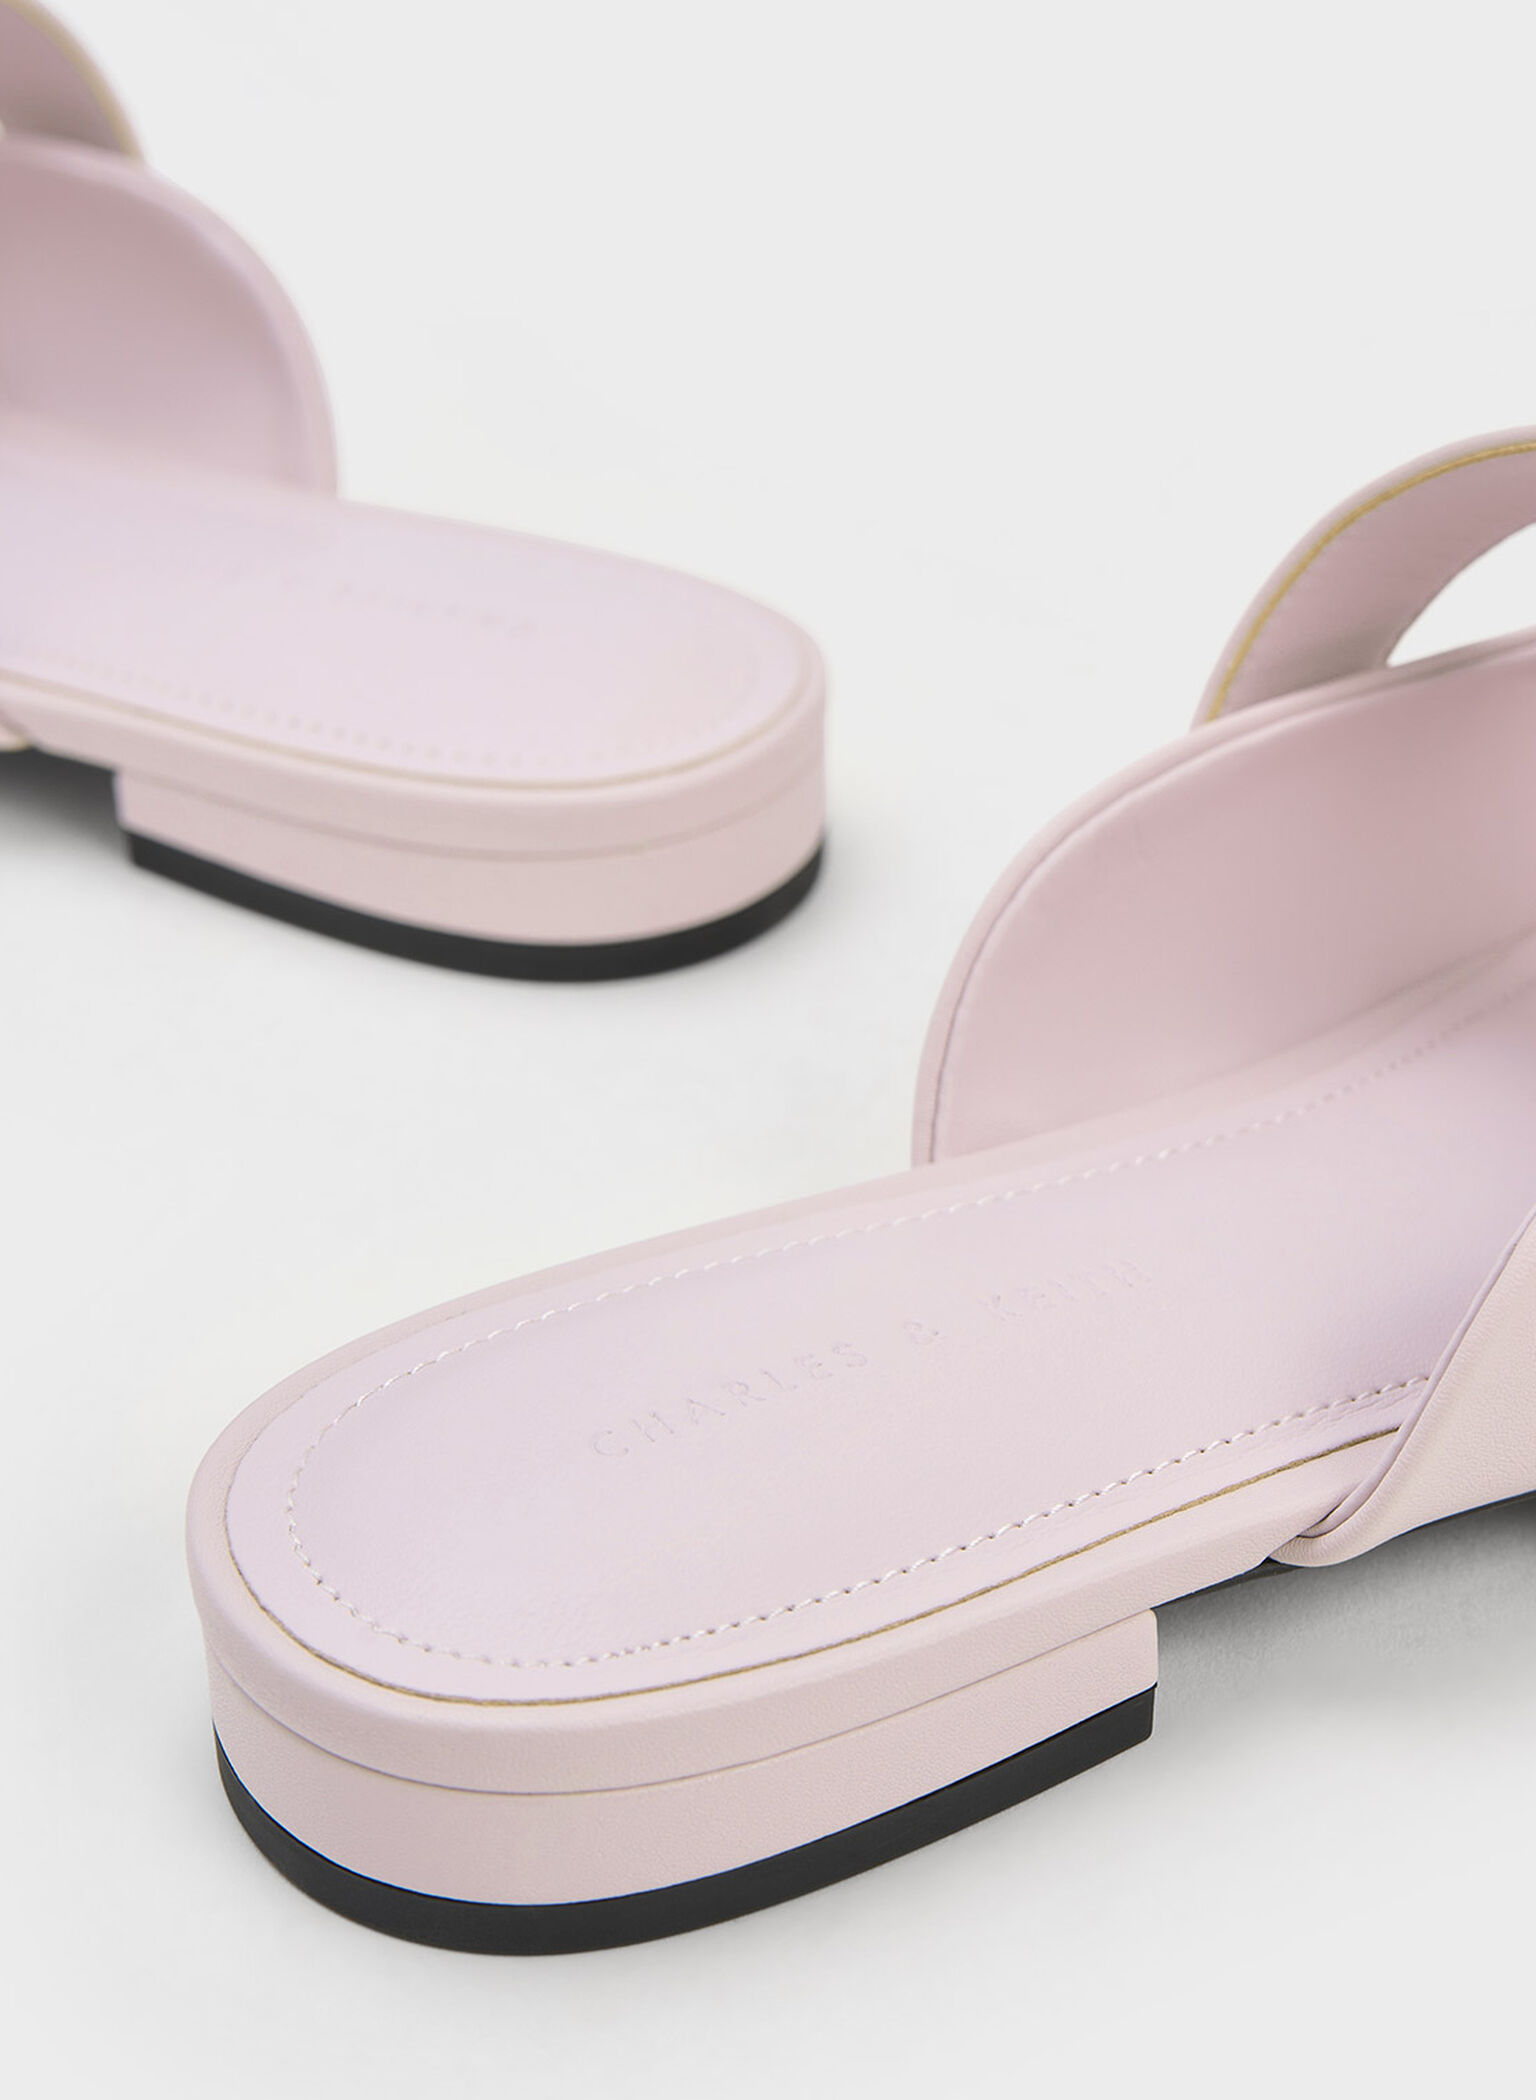 Patent Pearl Buckle Mary Jane Mules, Lilac, hi-res